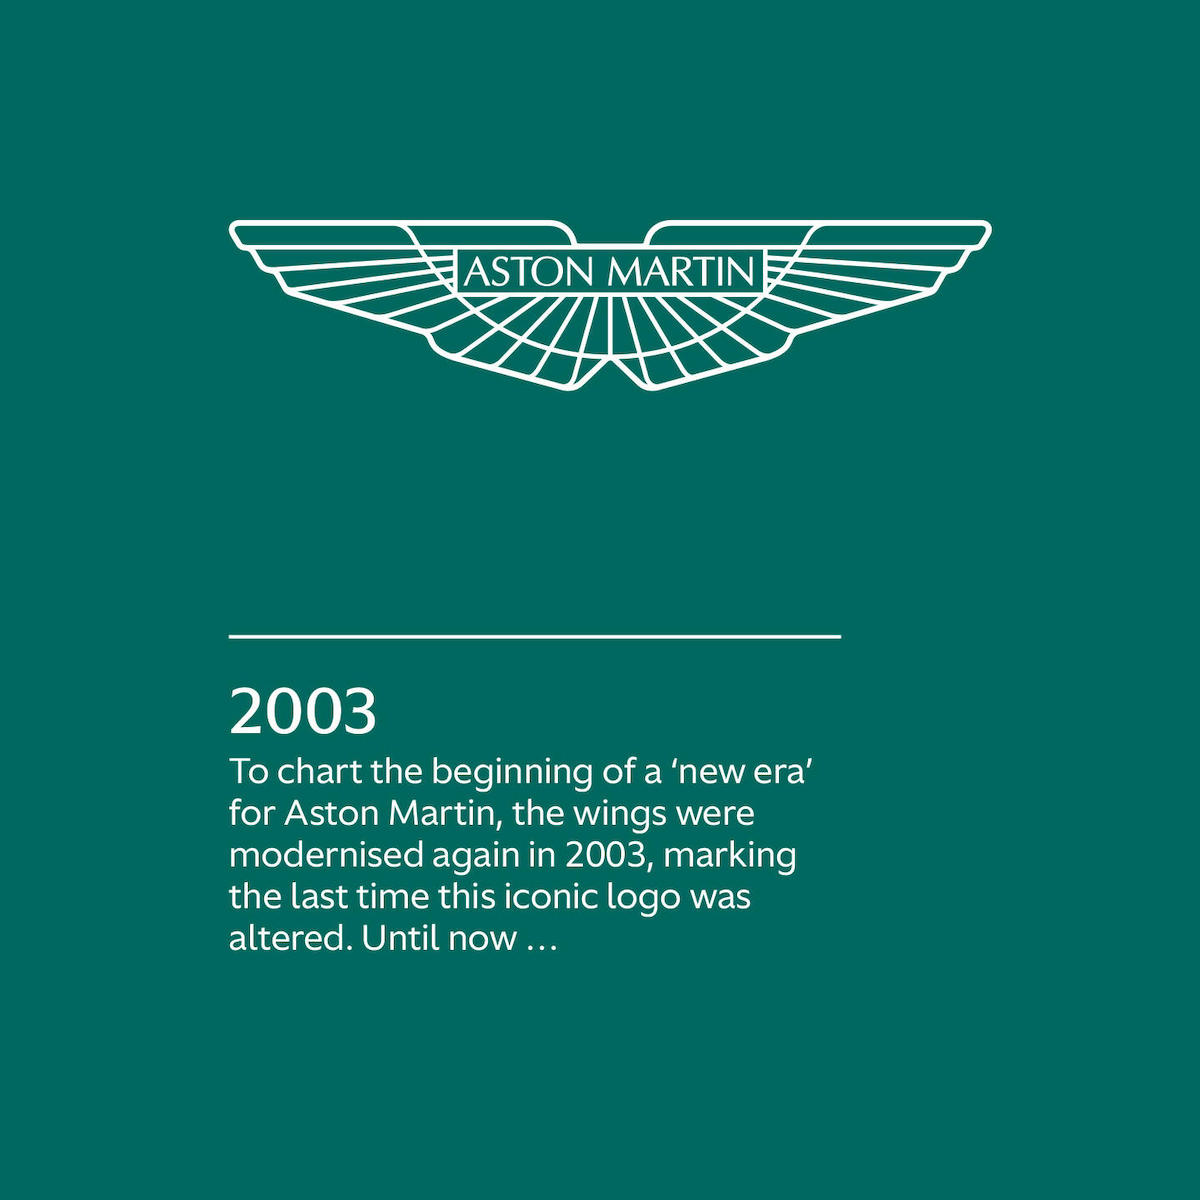 The 2003 version of the Aston Martin wings logo